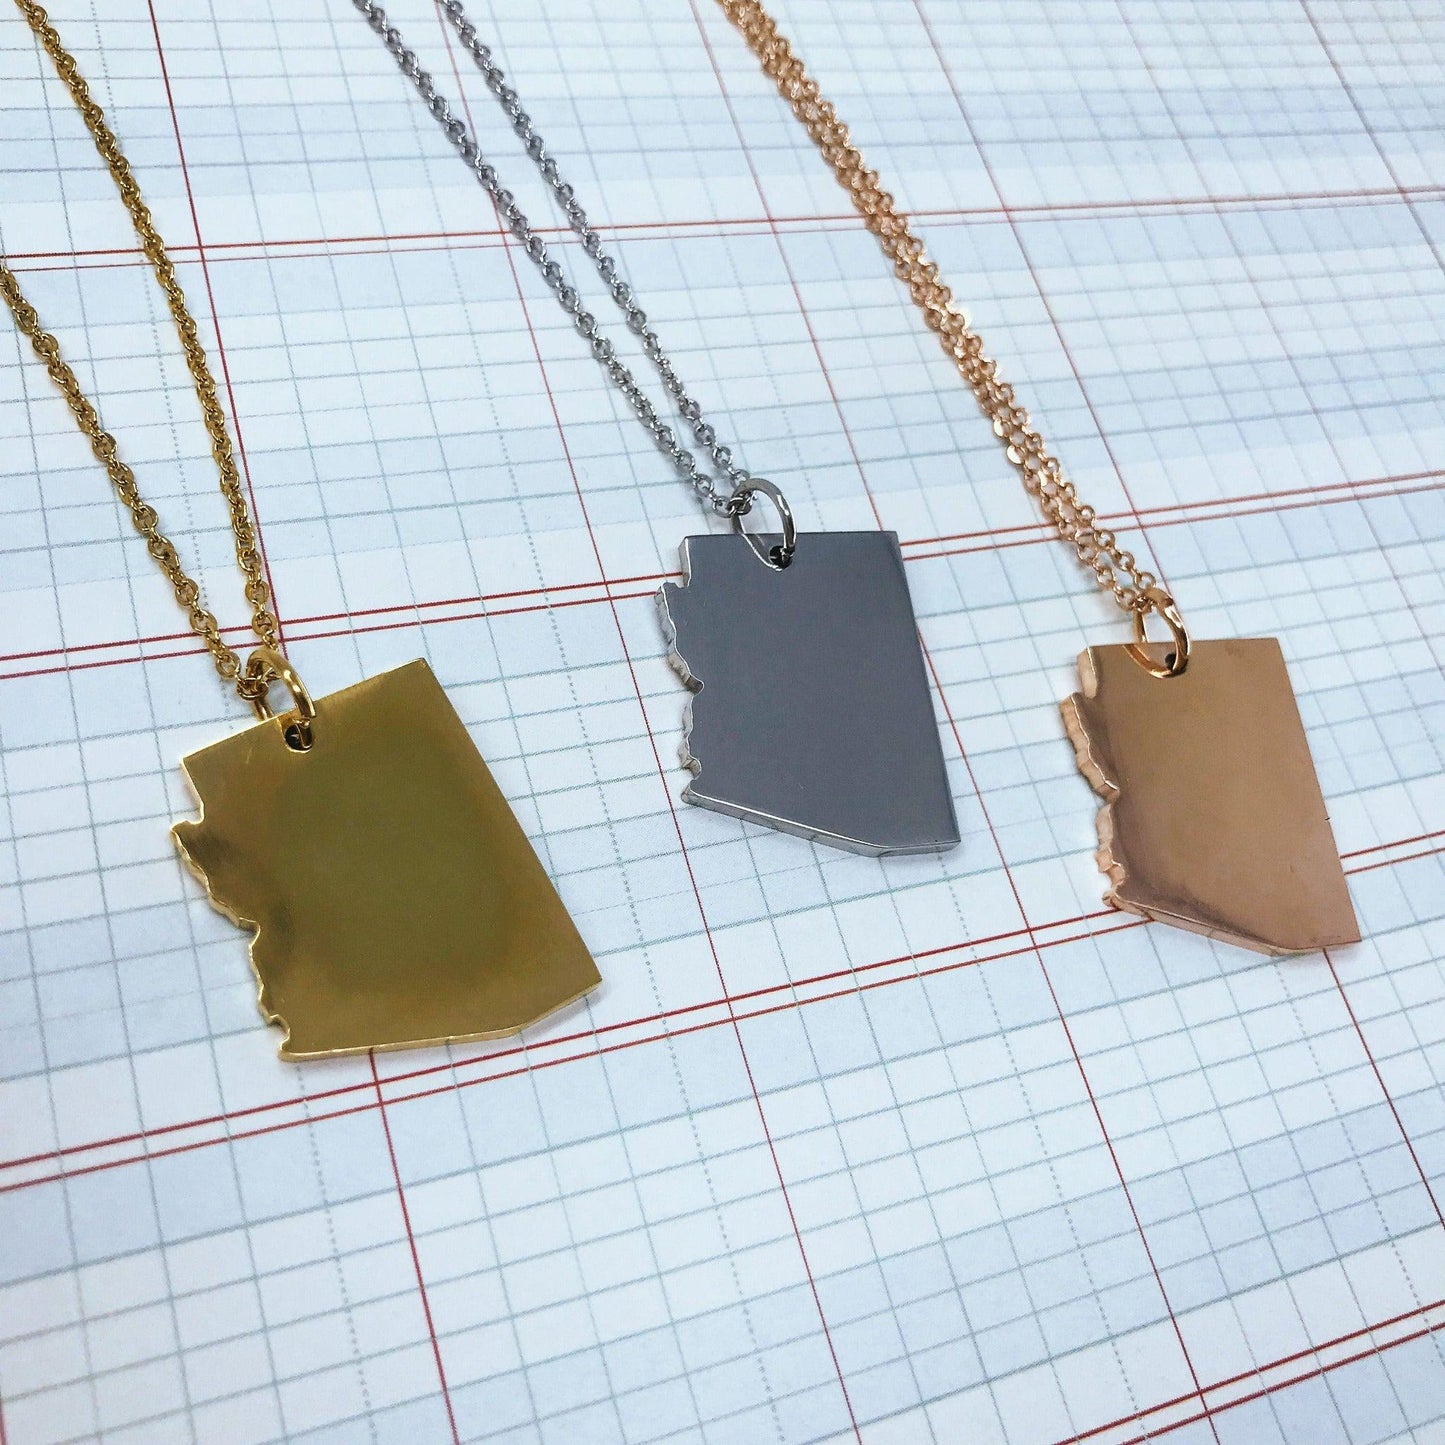 Arizona State Silhouette Necklaces in 3 different colors: Gold, Silver & Rose Gold